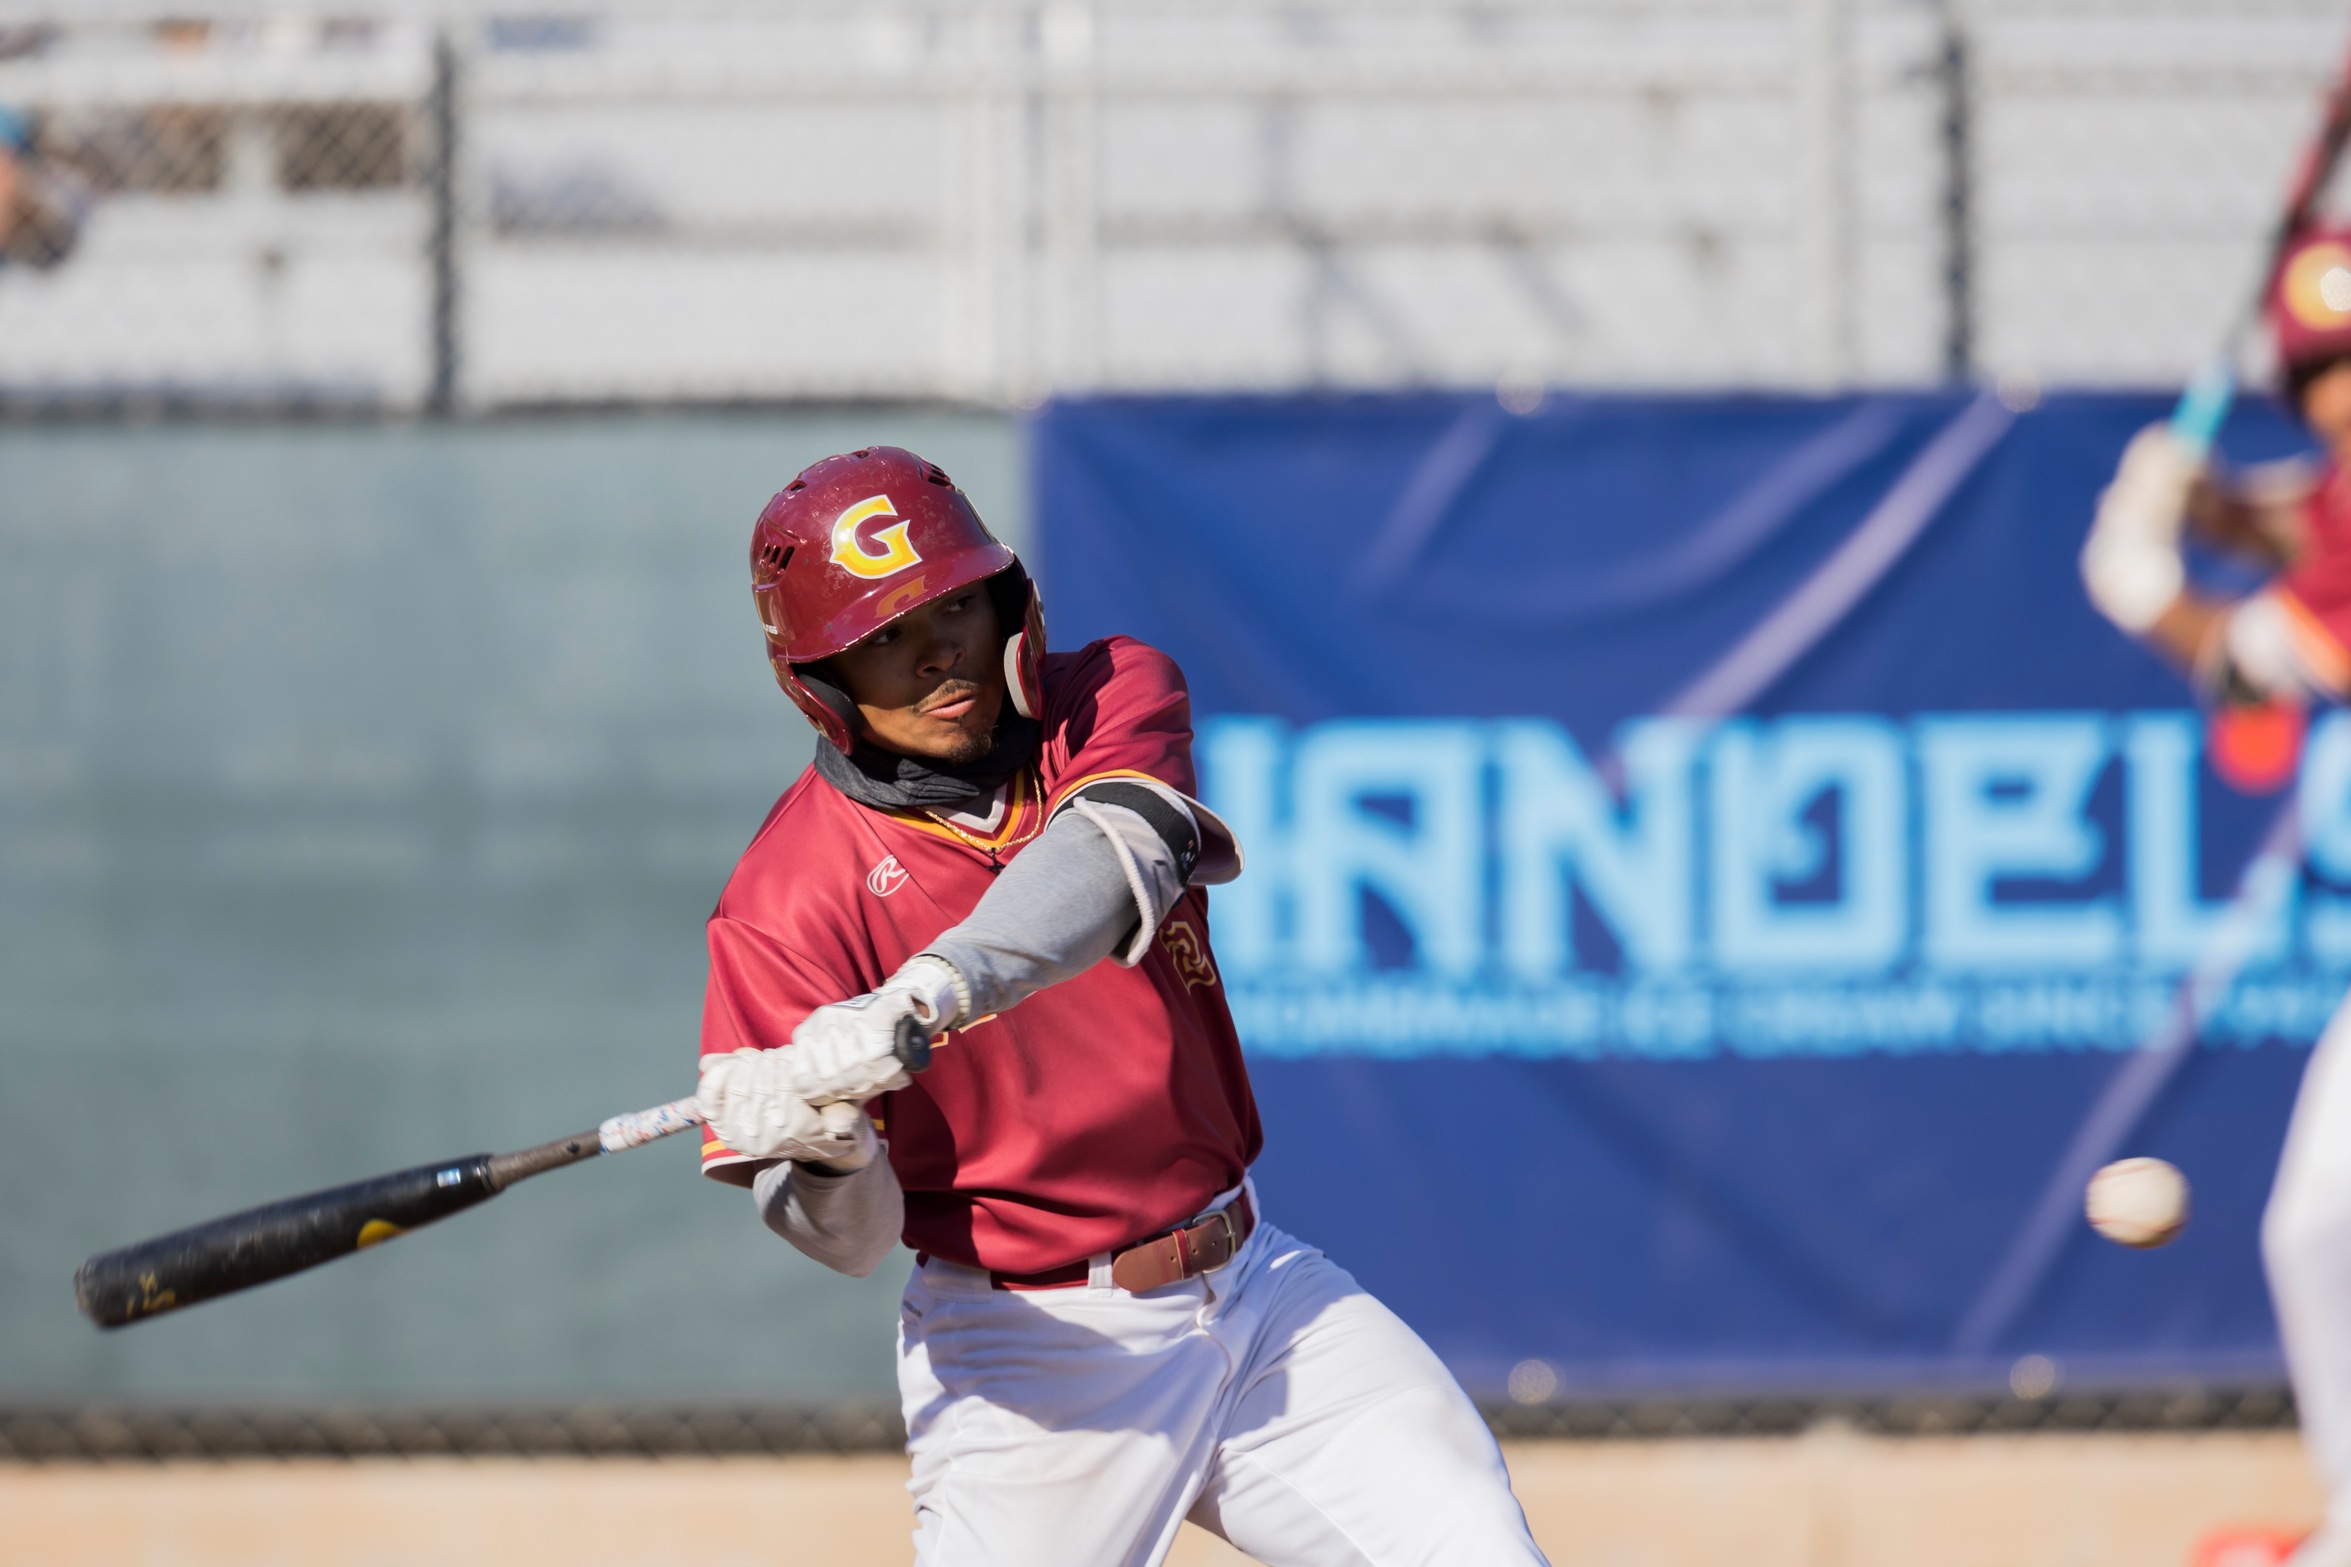 GCC Baseball hangs on for 15th straight win over Canyons, 7-6 April 7; leads WSC South by six games with seven conference games to play